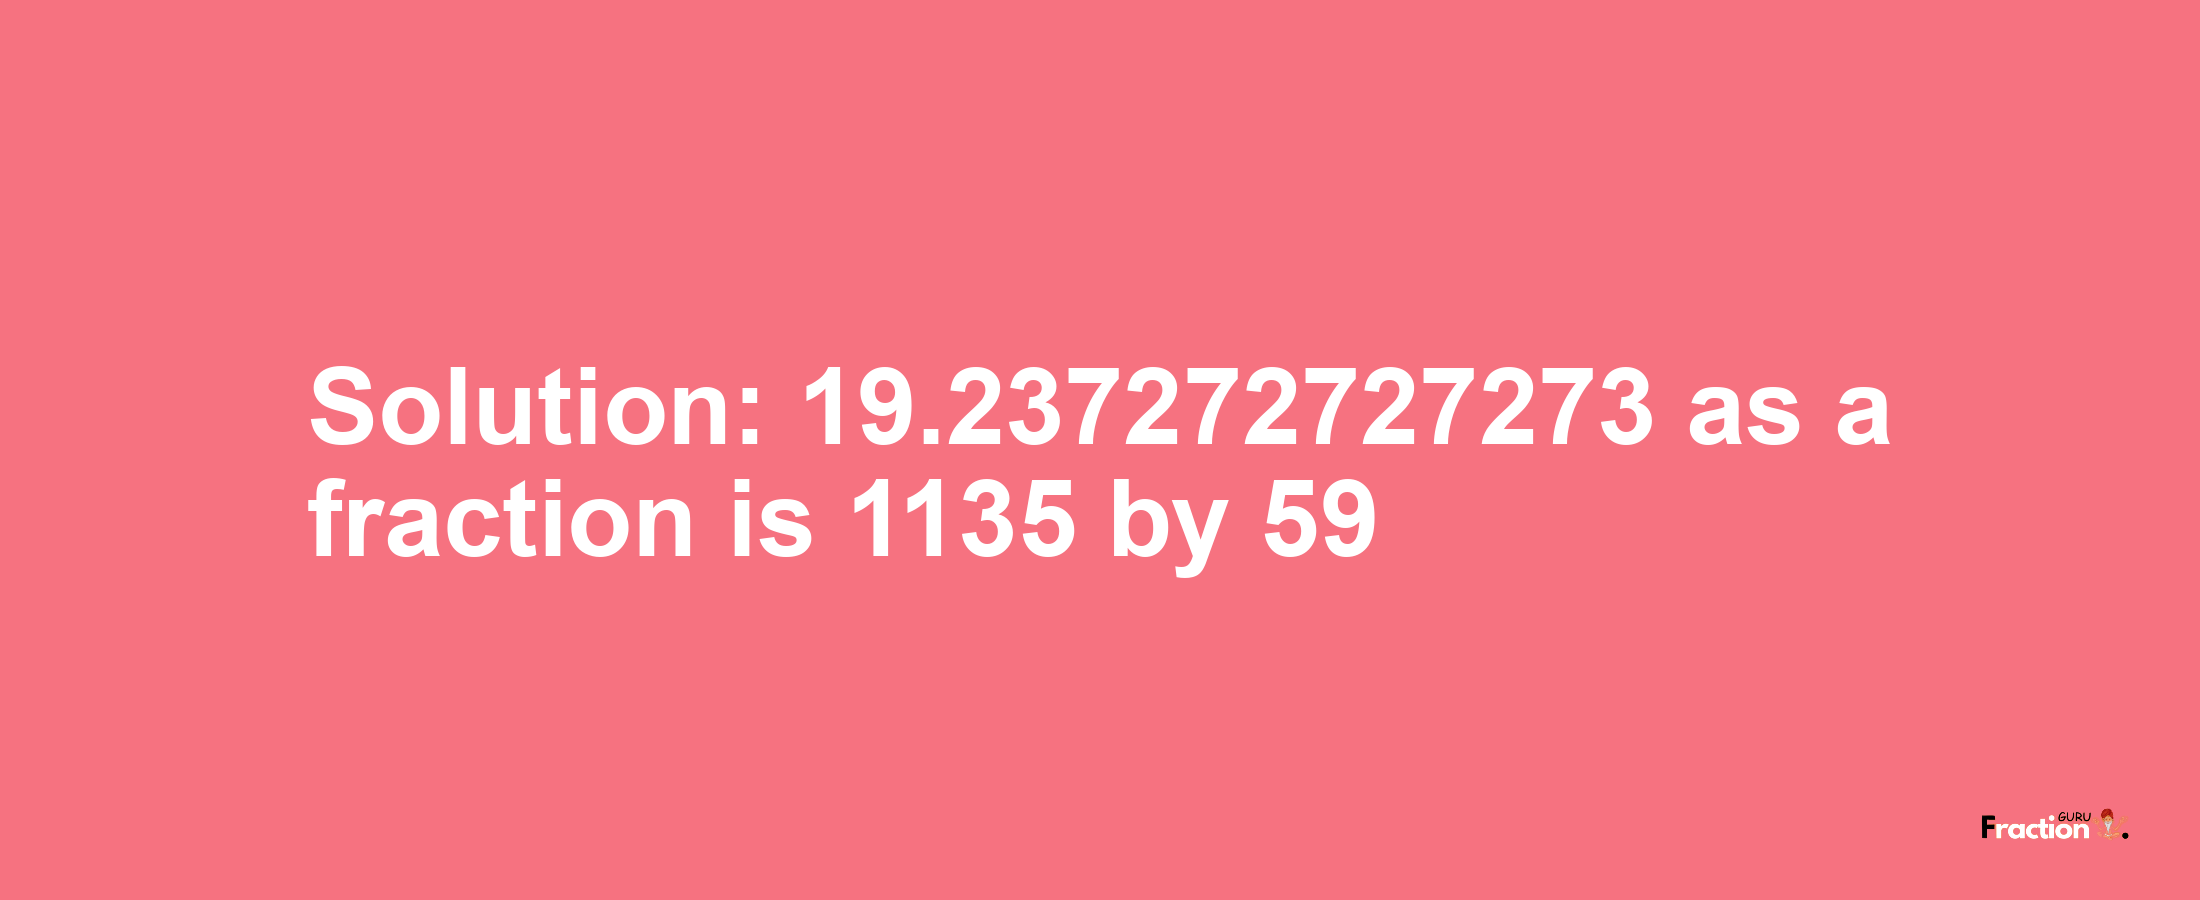 Solution:19.237272727273 as a fraction is 1135/59